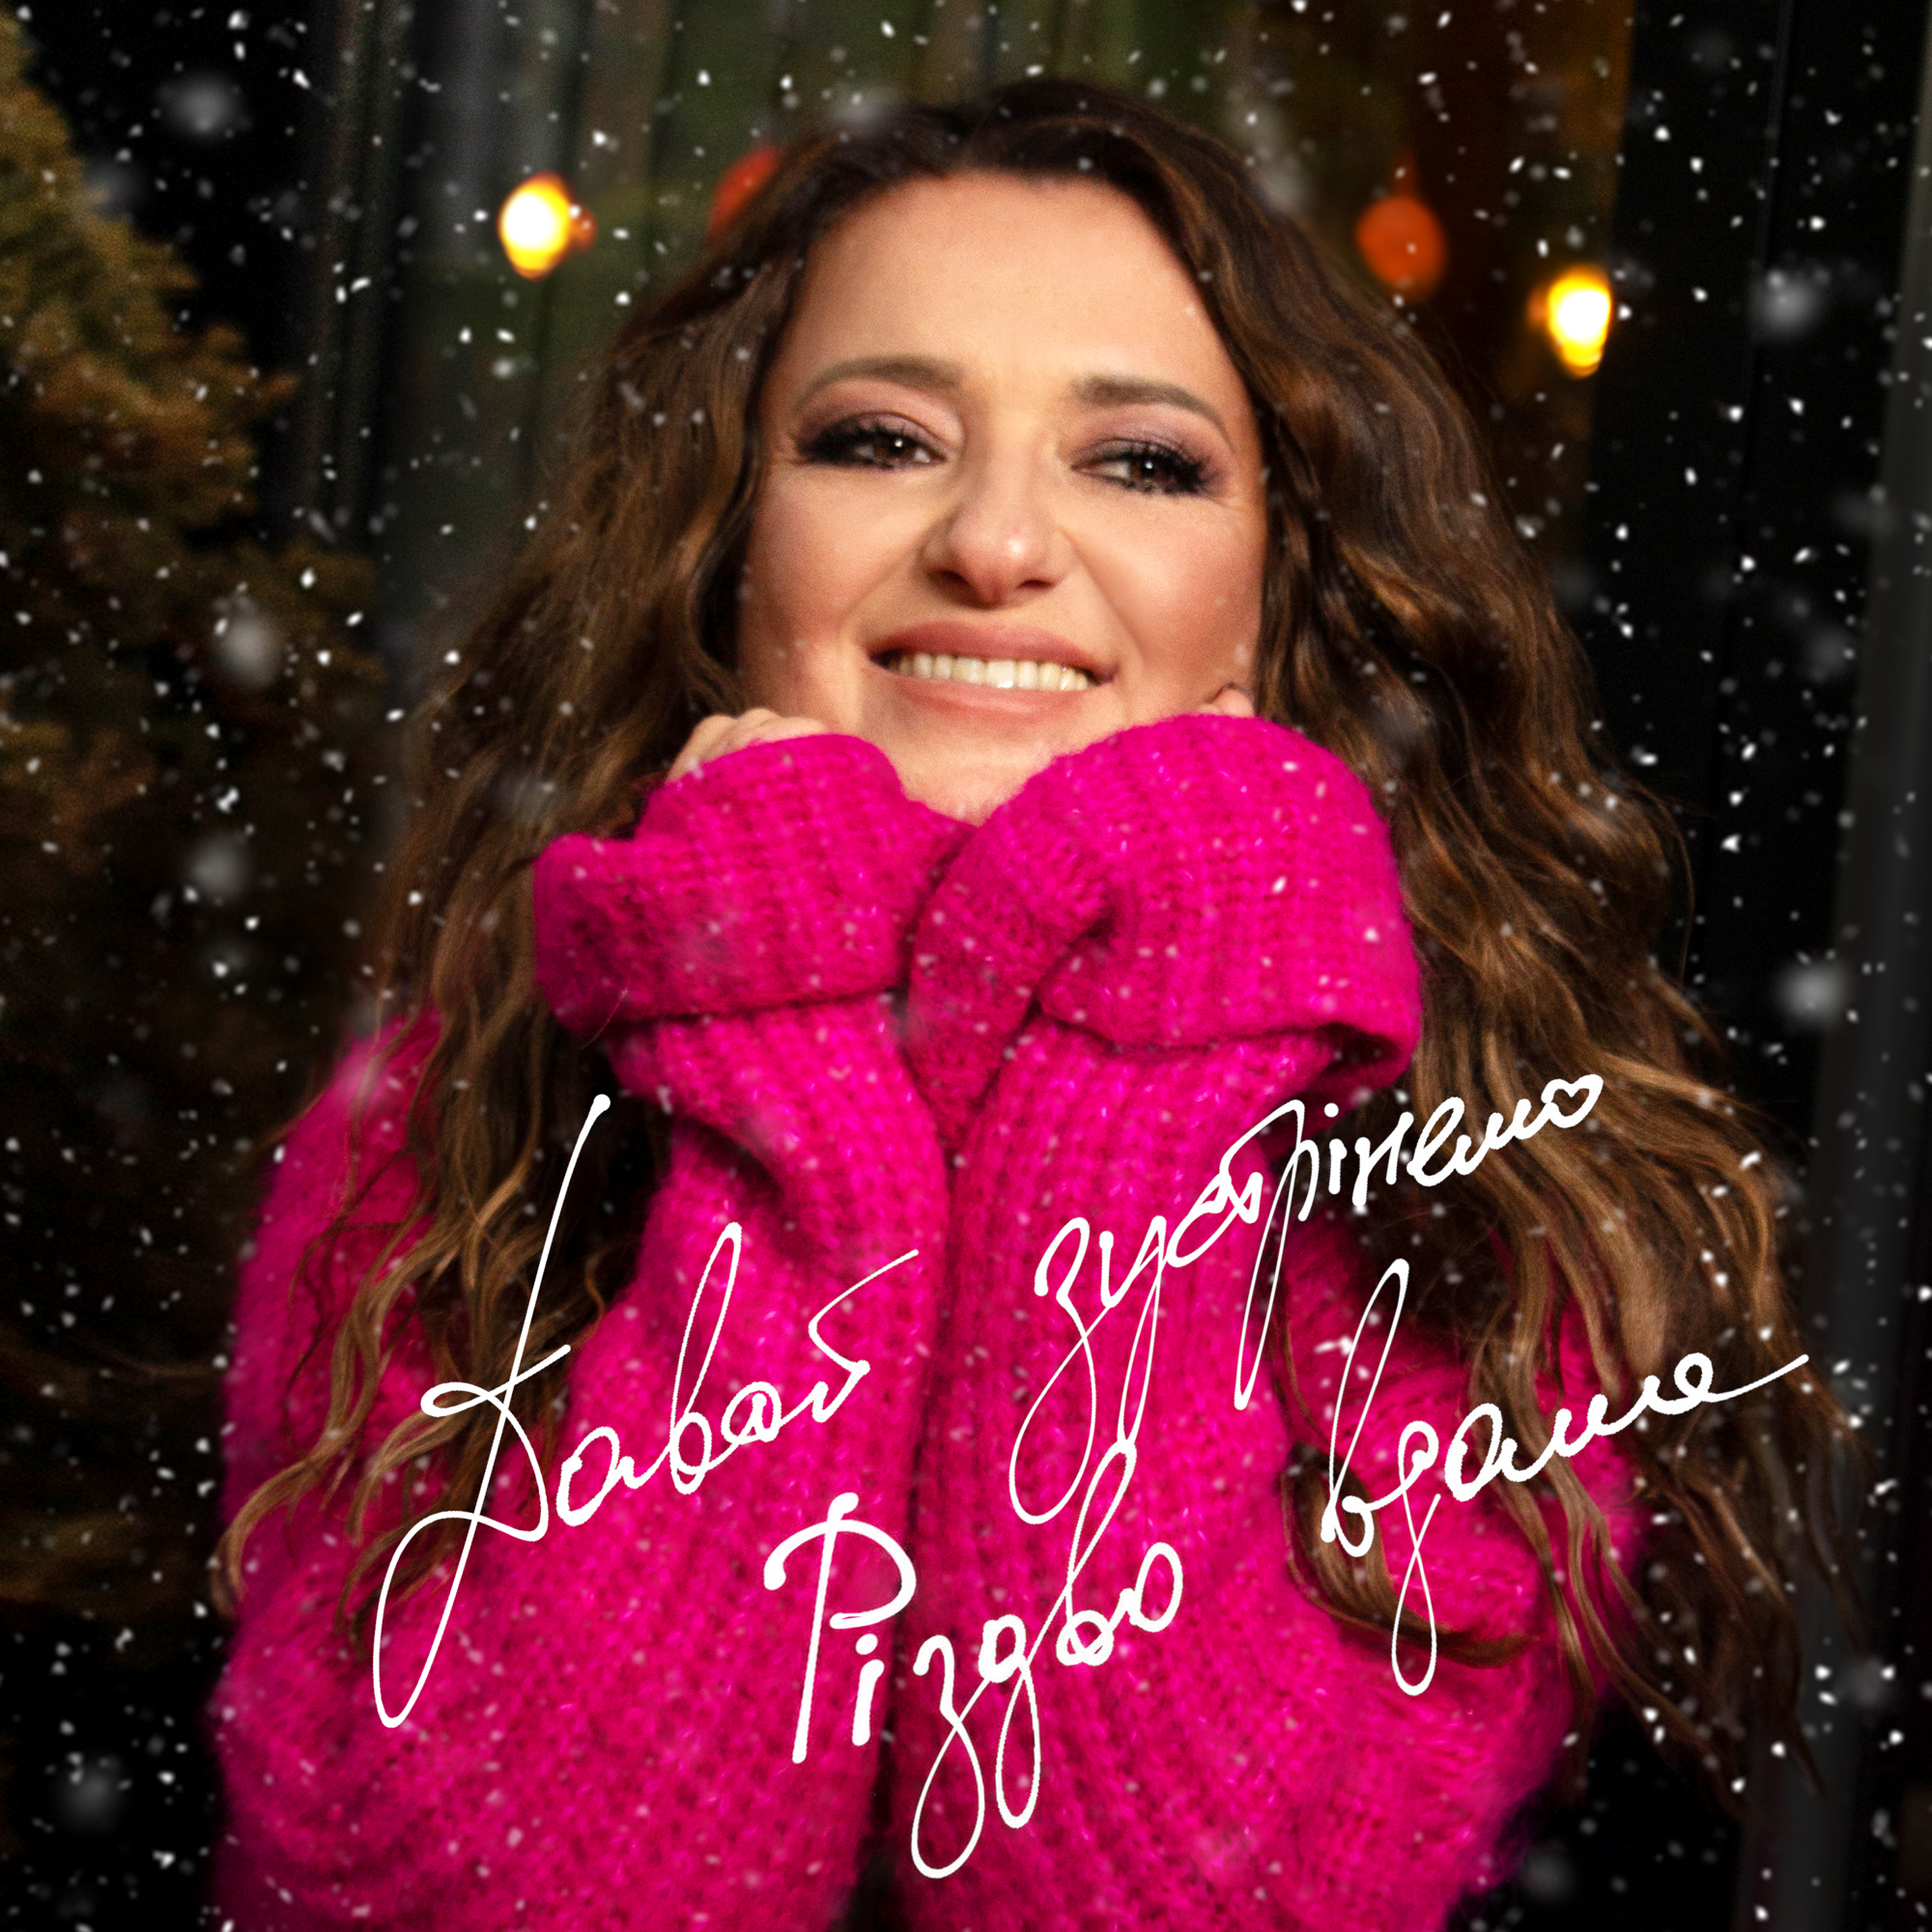 ''Let's welcome Christmas at home'': Natalia Mohylevska presents festive music video